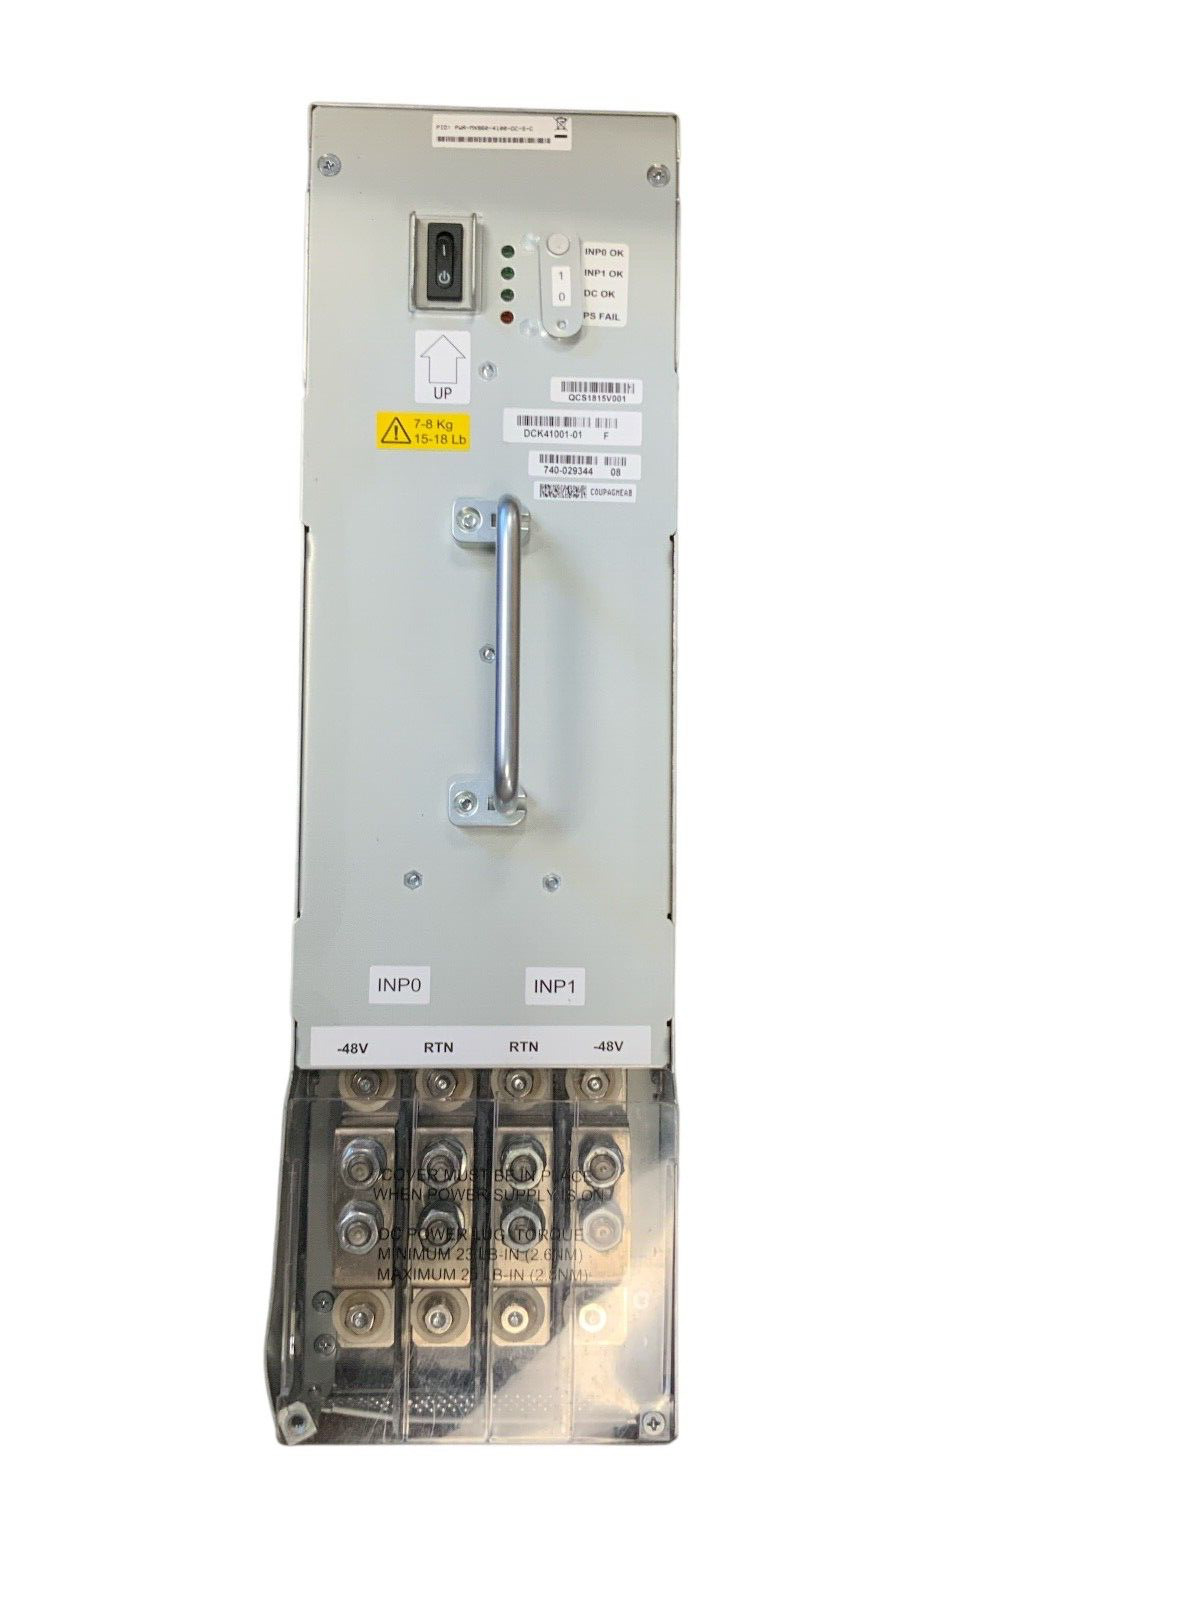 Quality Components & Systems PTE LTD DC Power Supply Model # DCK41001-01